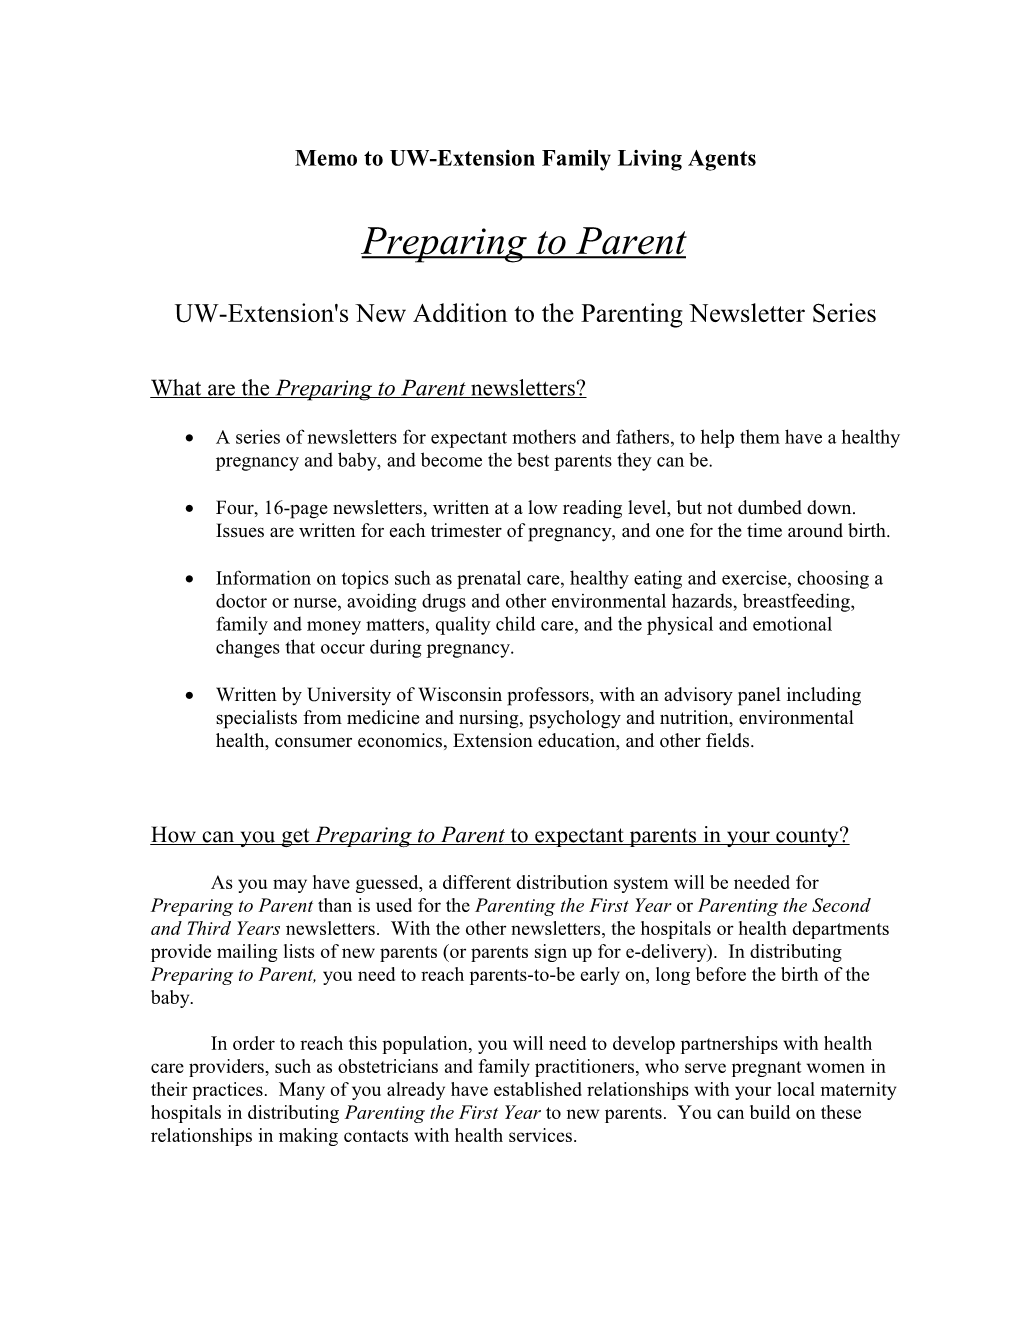 Preparing to Parent Is a Series of Four Newsletters for Mothers and Fathers-To-Be